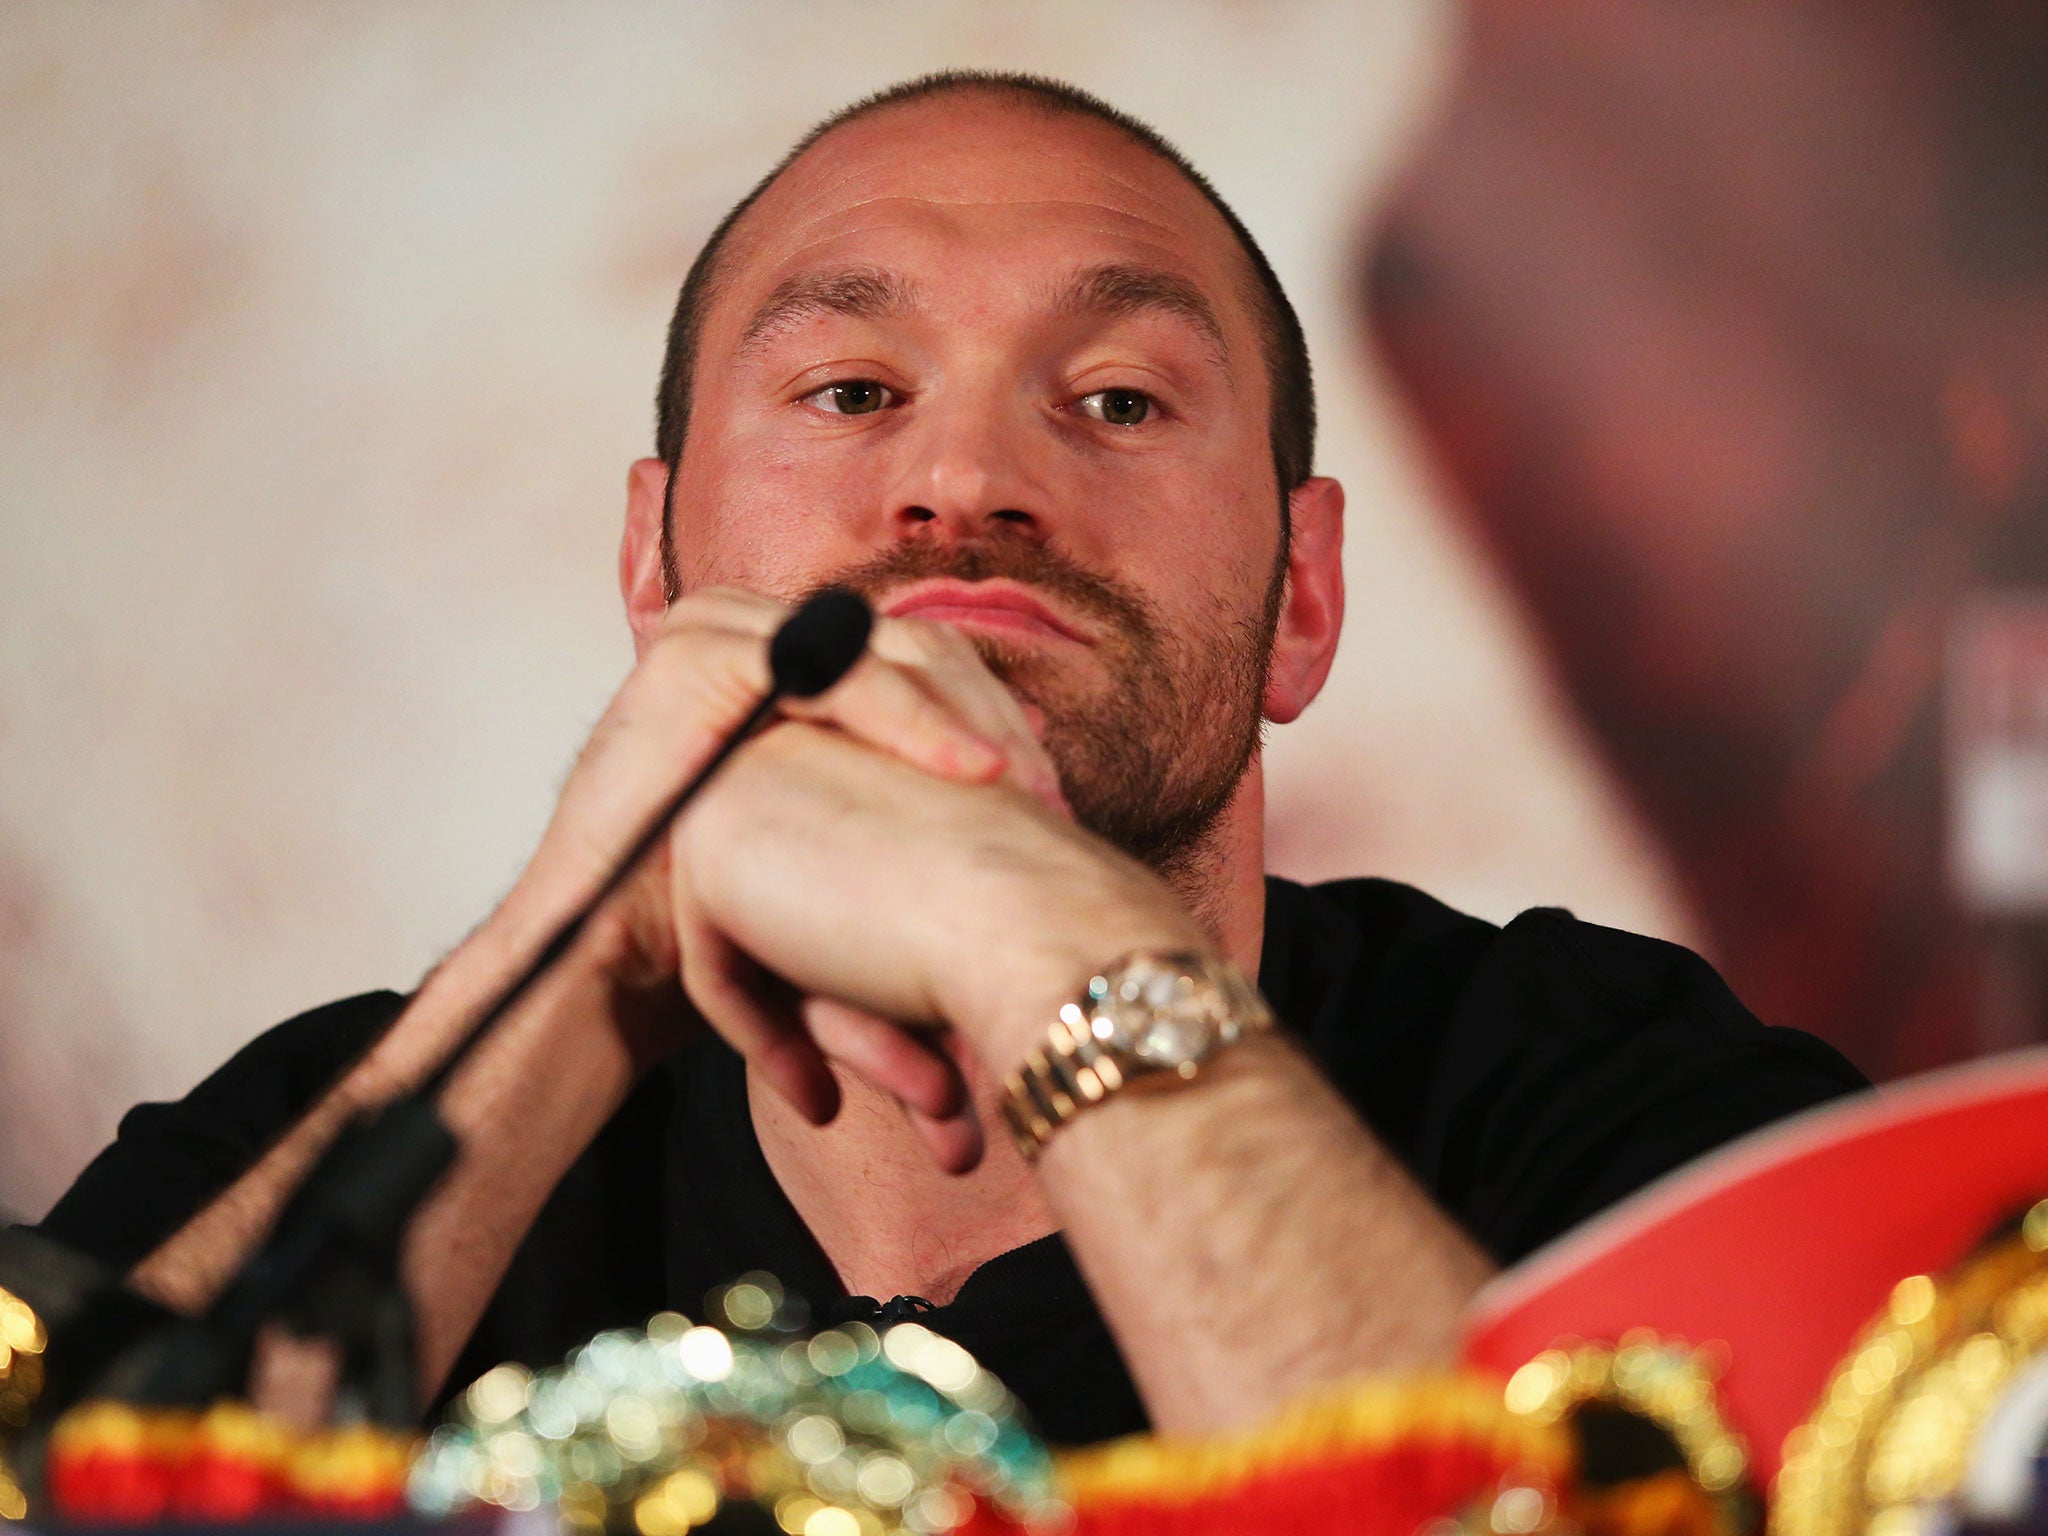 Fury at last April's press conference ahead of his scheduled rematch with Wladimir Klitschko